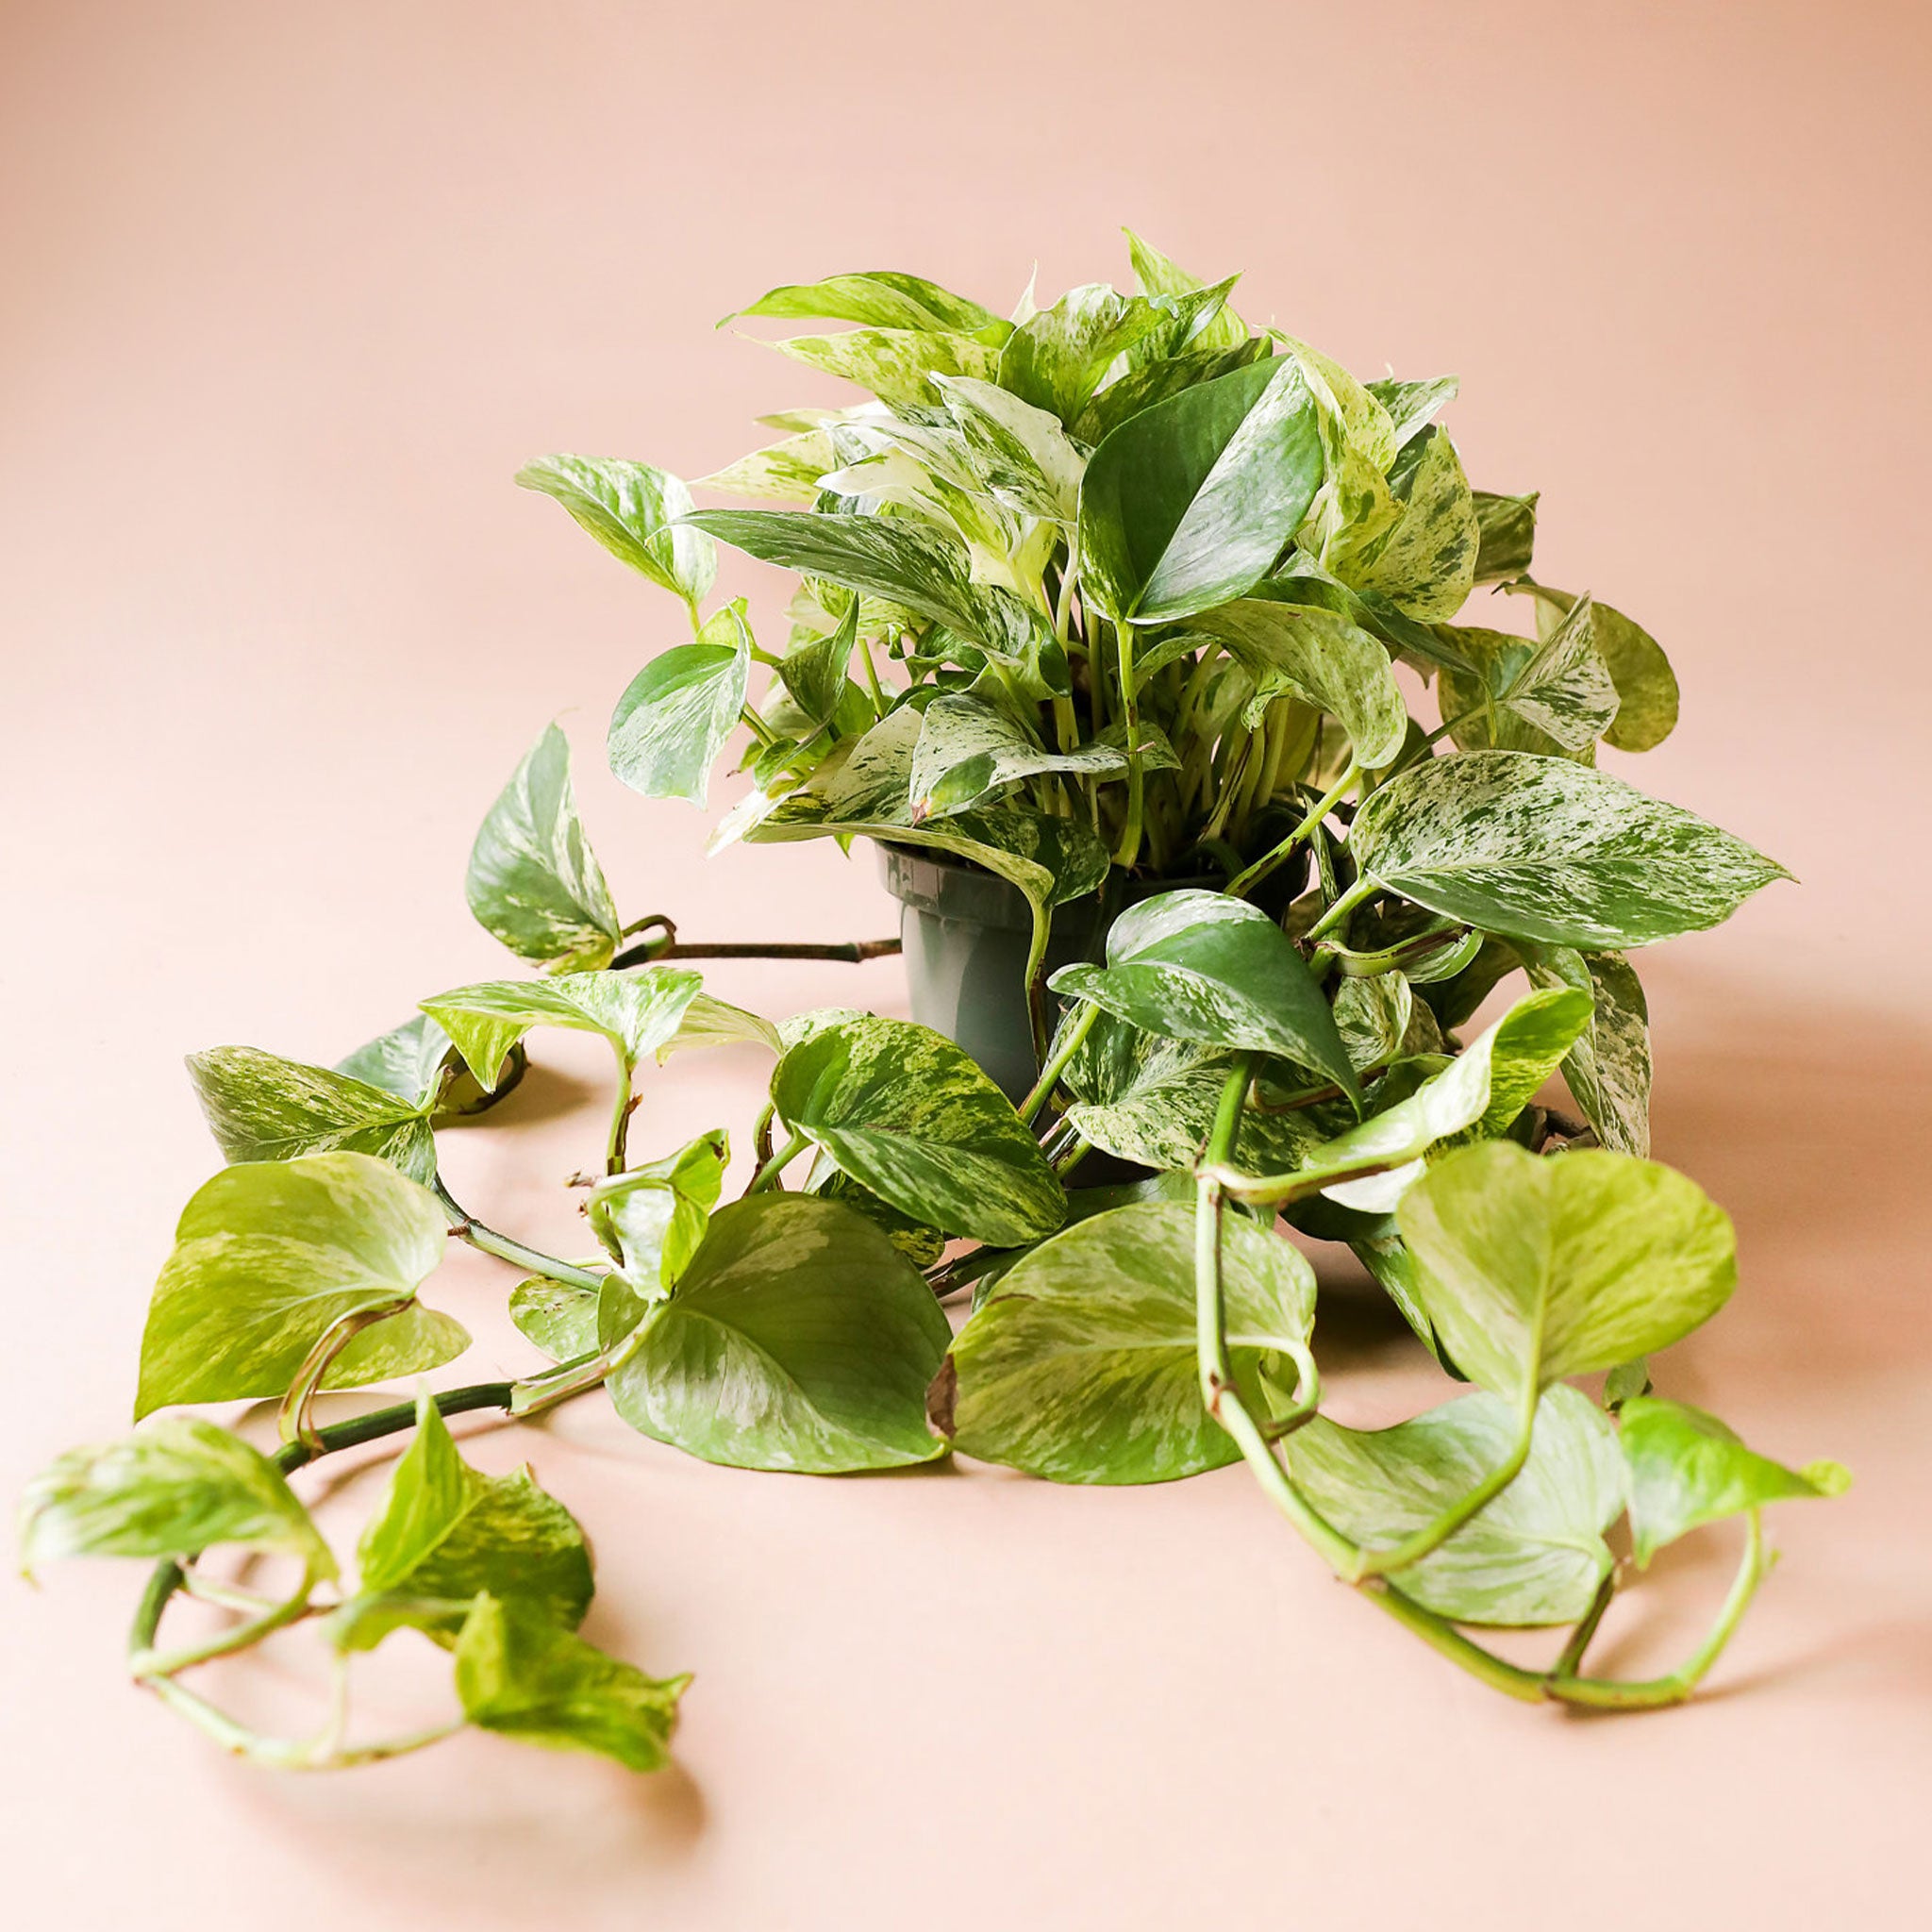 In front of a pink background is a dark green cylinder pot with a marble queen pothos inside. The plant has long green vines that fall down the side of the pot. The leaves are yellow and green variegated.